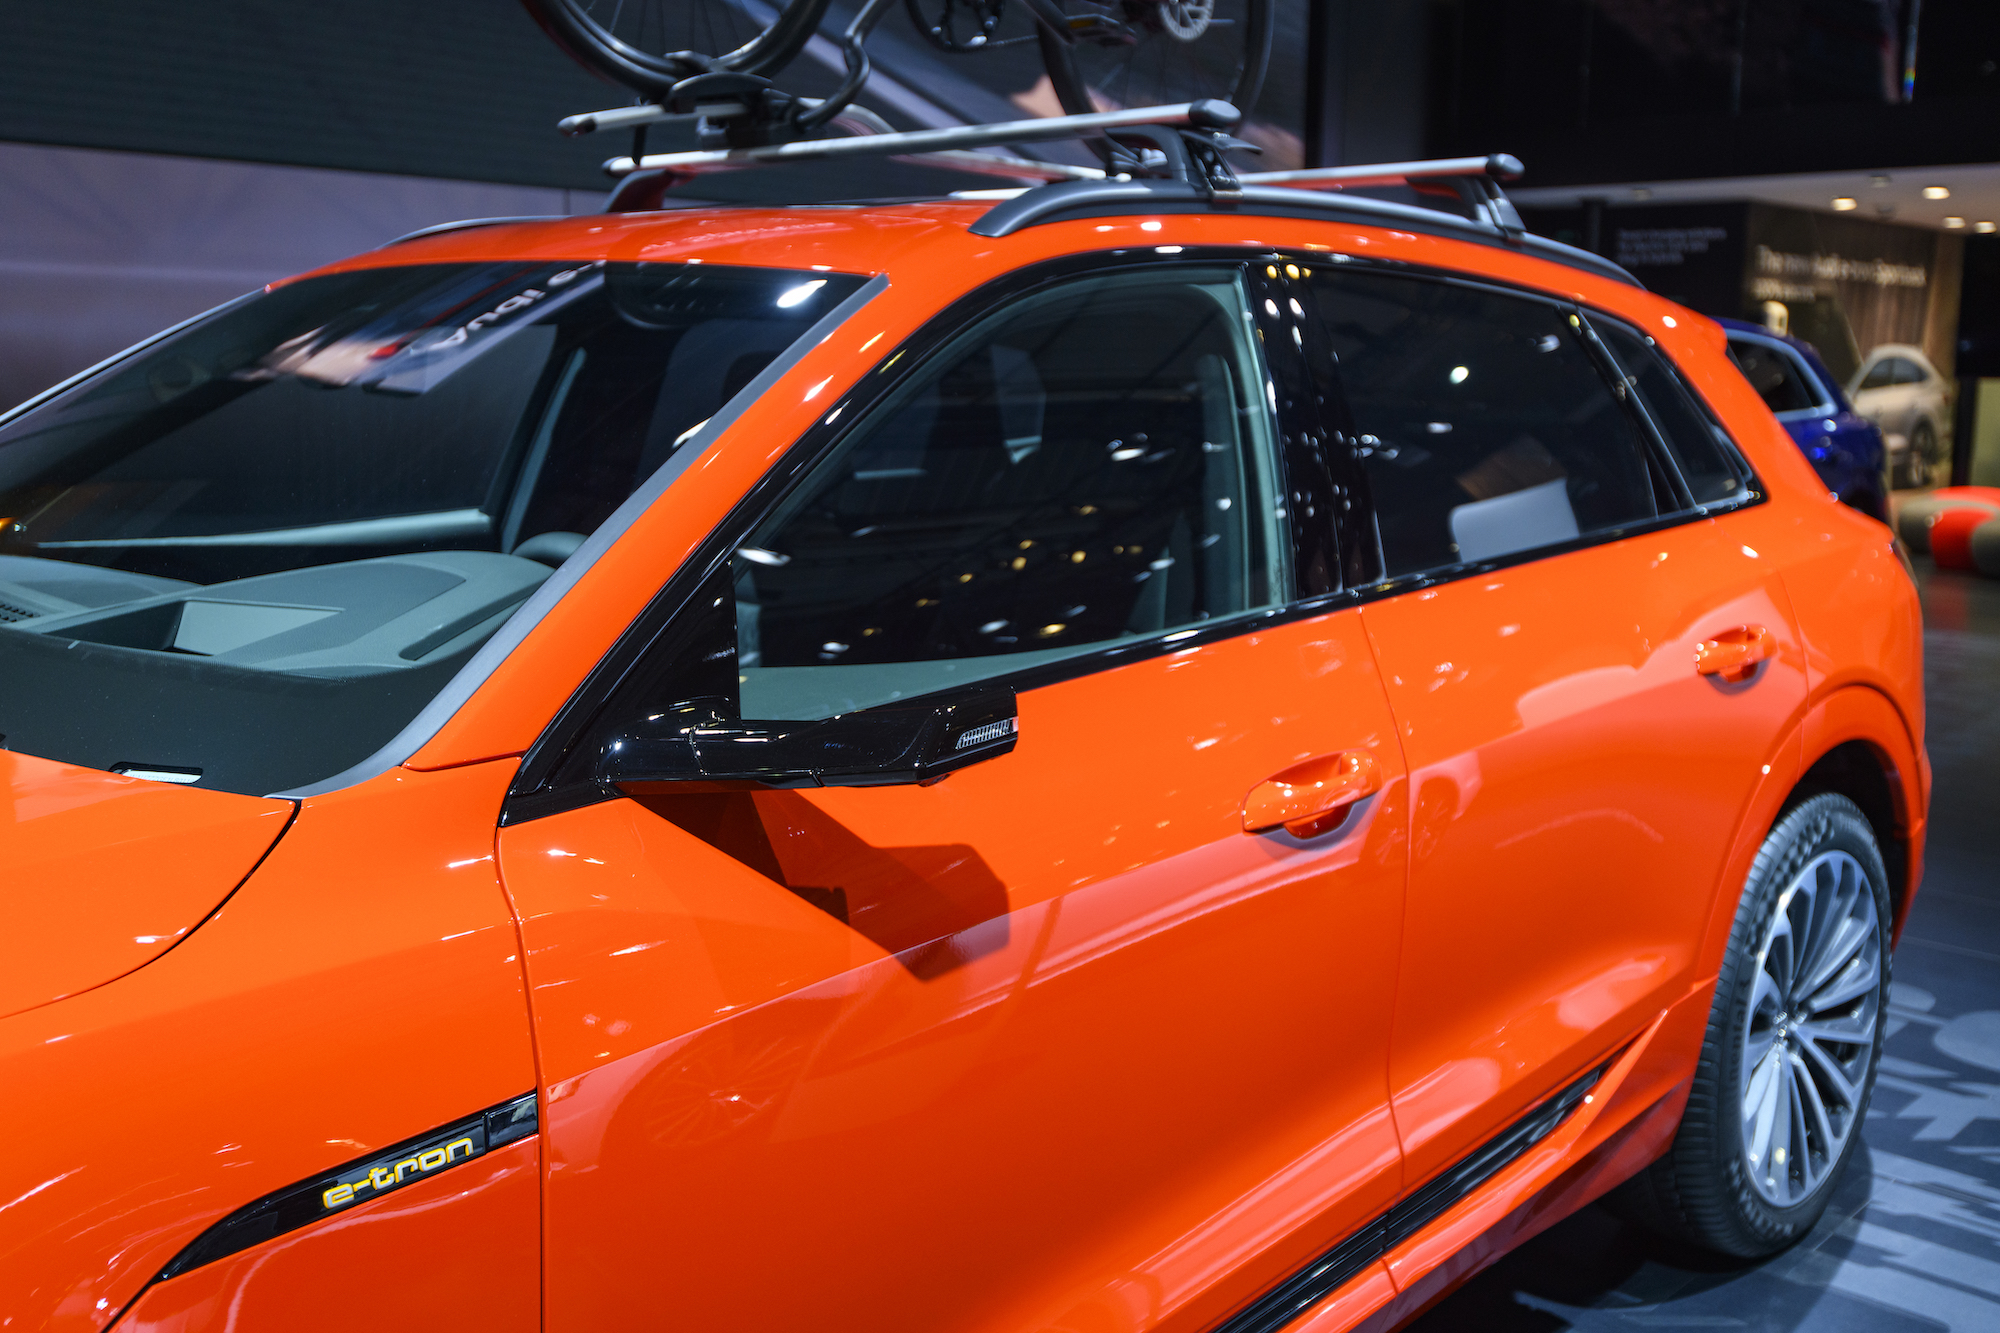 An orange 2020 Audi e-tron 55 Quattro all-electric luxury crossover SUV on display at Brussels Expo on January 9, 2020, in Brussels, Belgium